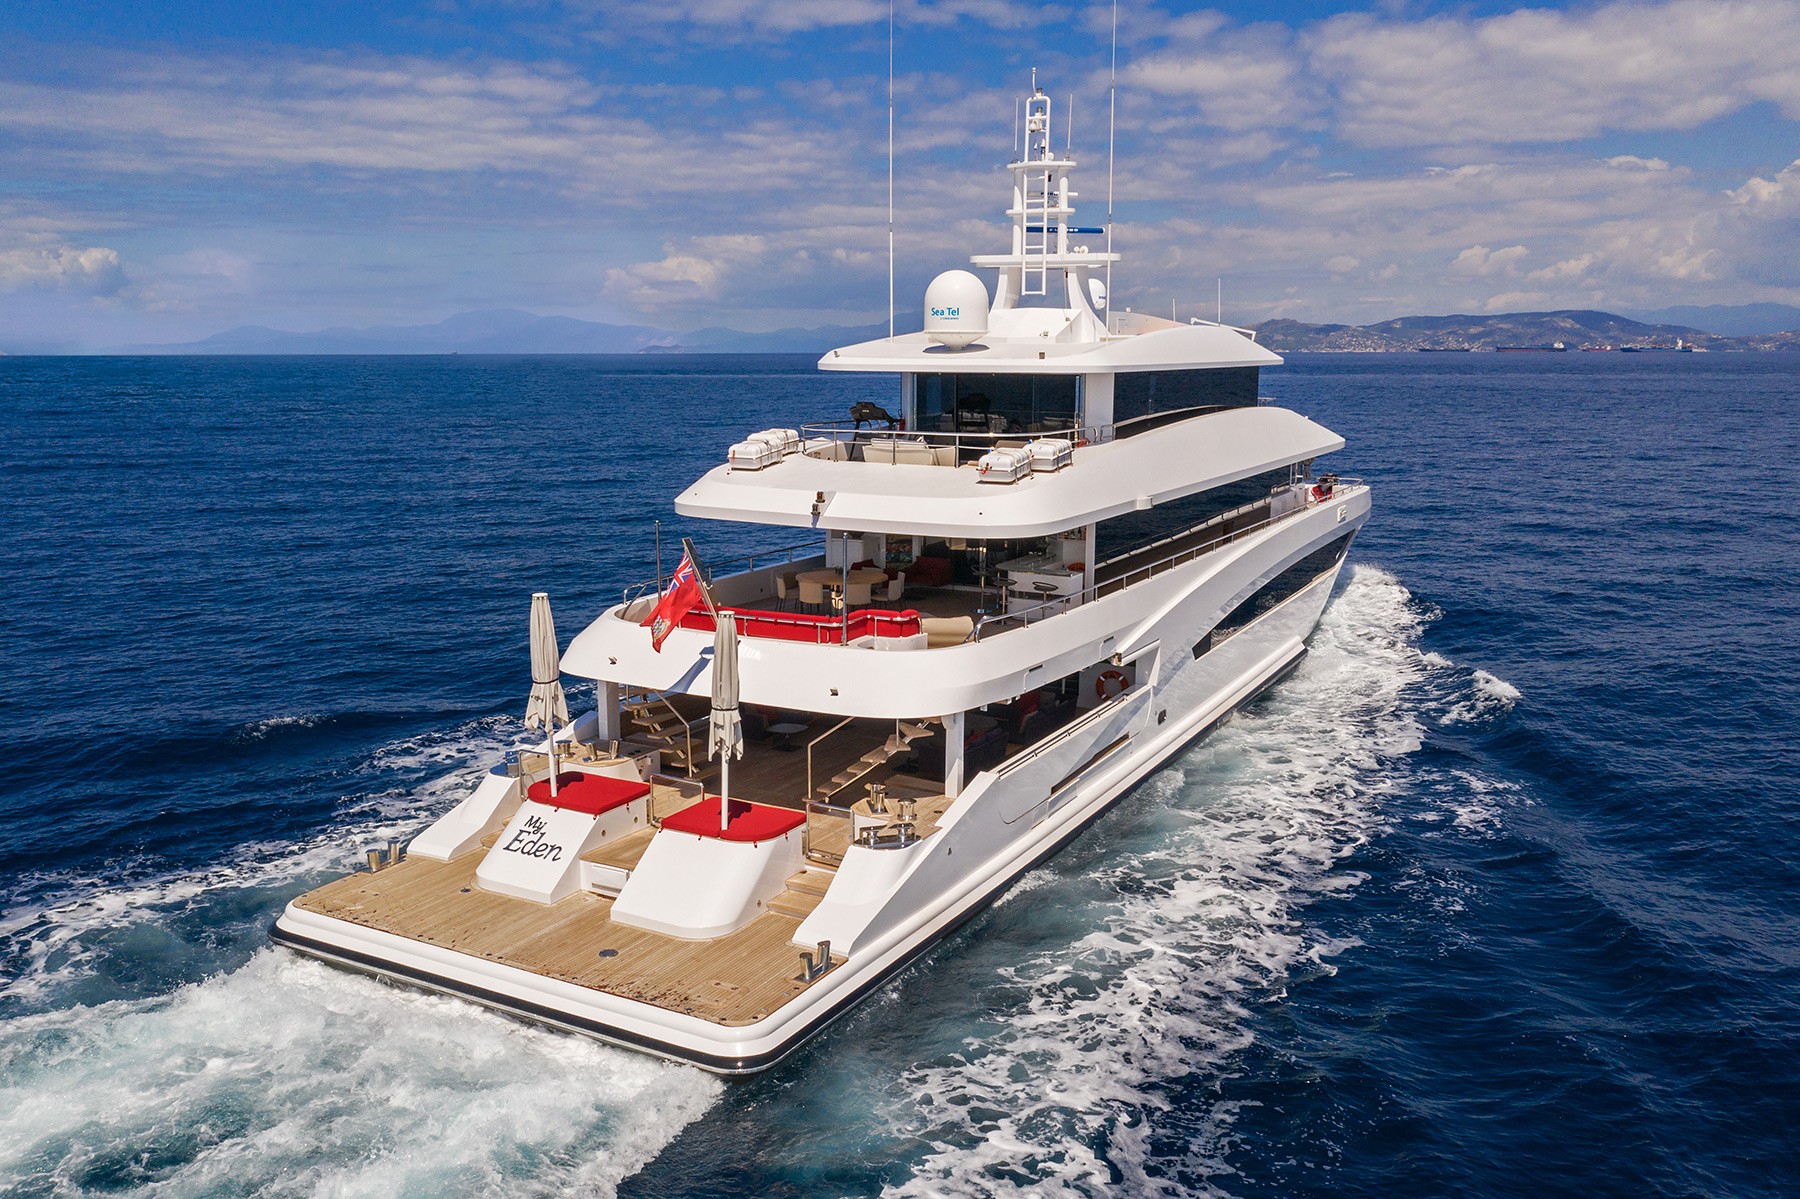 Eden Luxury Motor Yacht for charter with water toys and activies - High Point Yachting